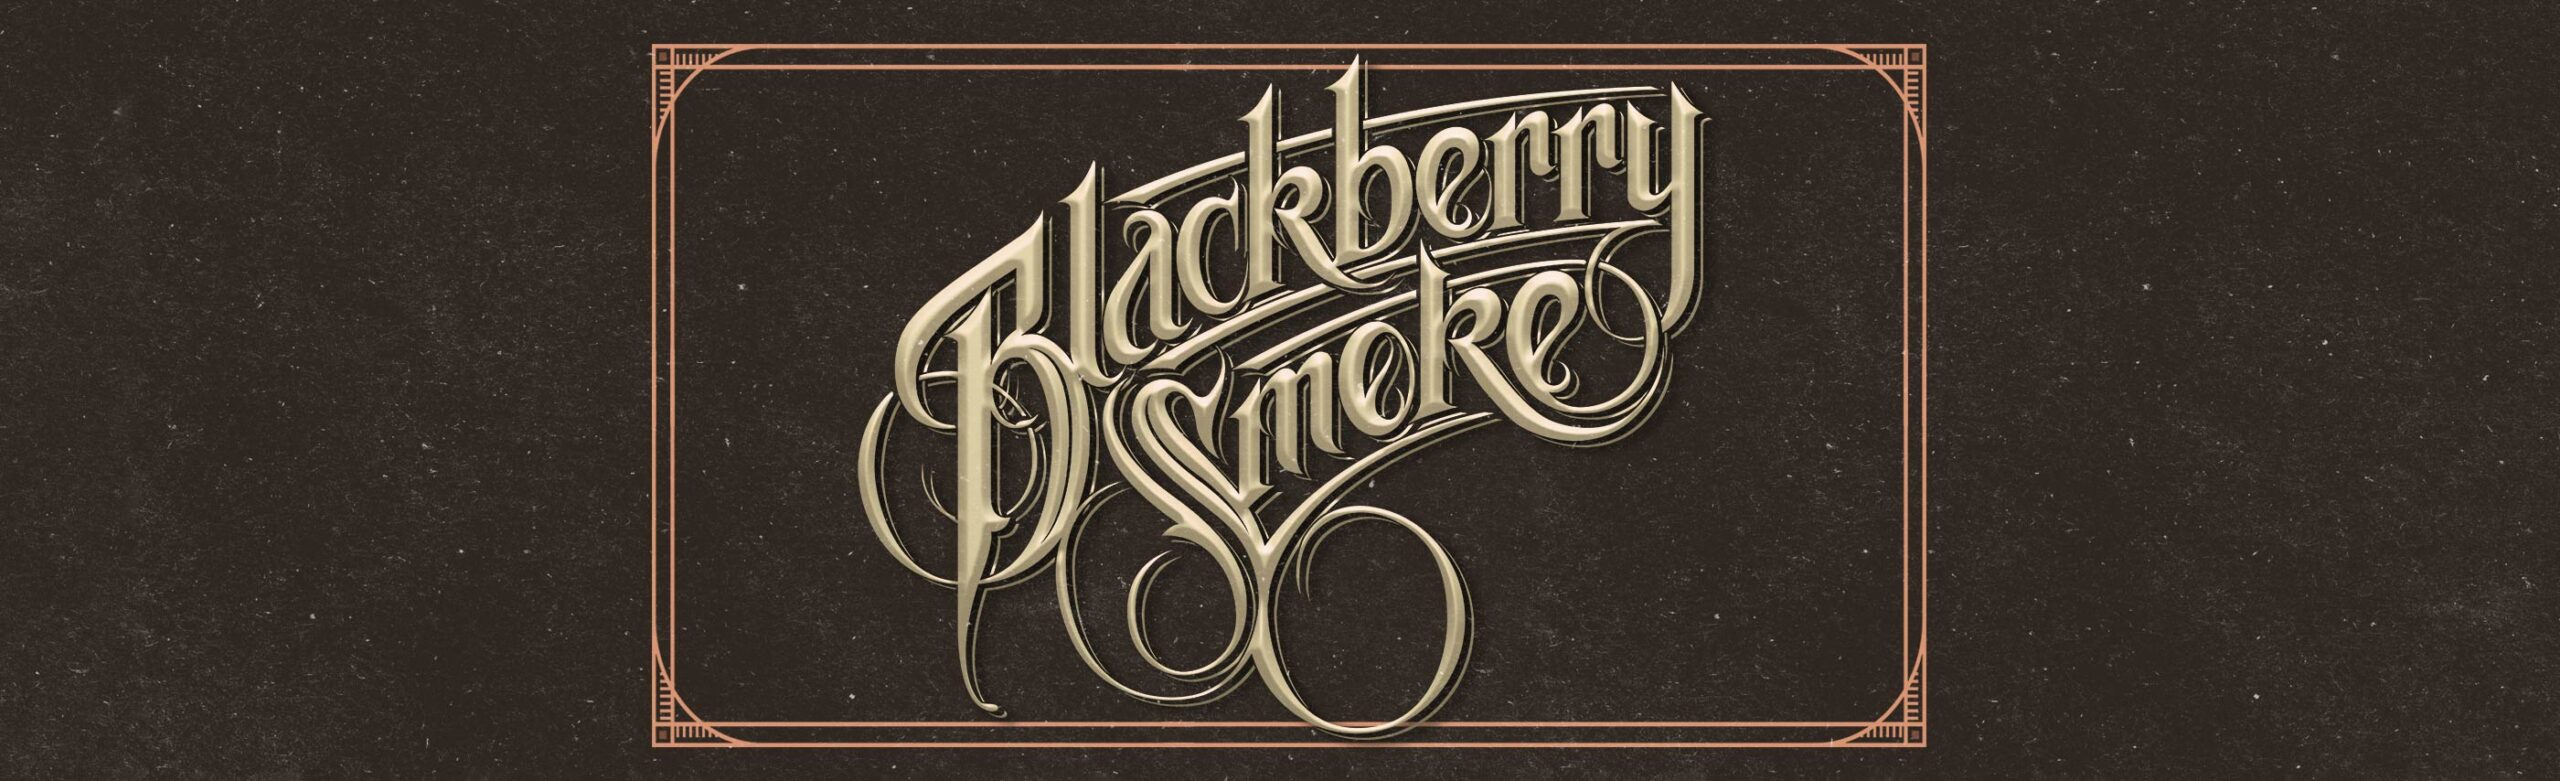 Blackberry Smoke Confirms Concerts at The ELM and The Wilma with Miles Miller Image